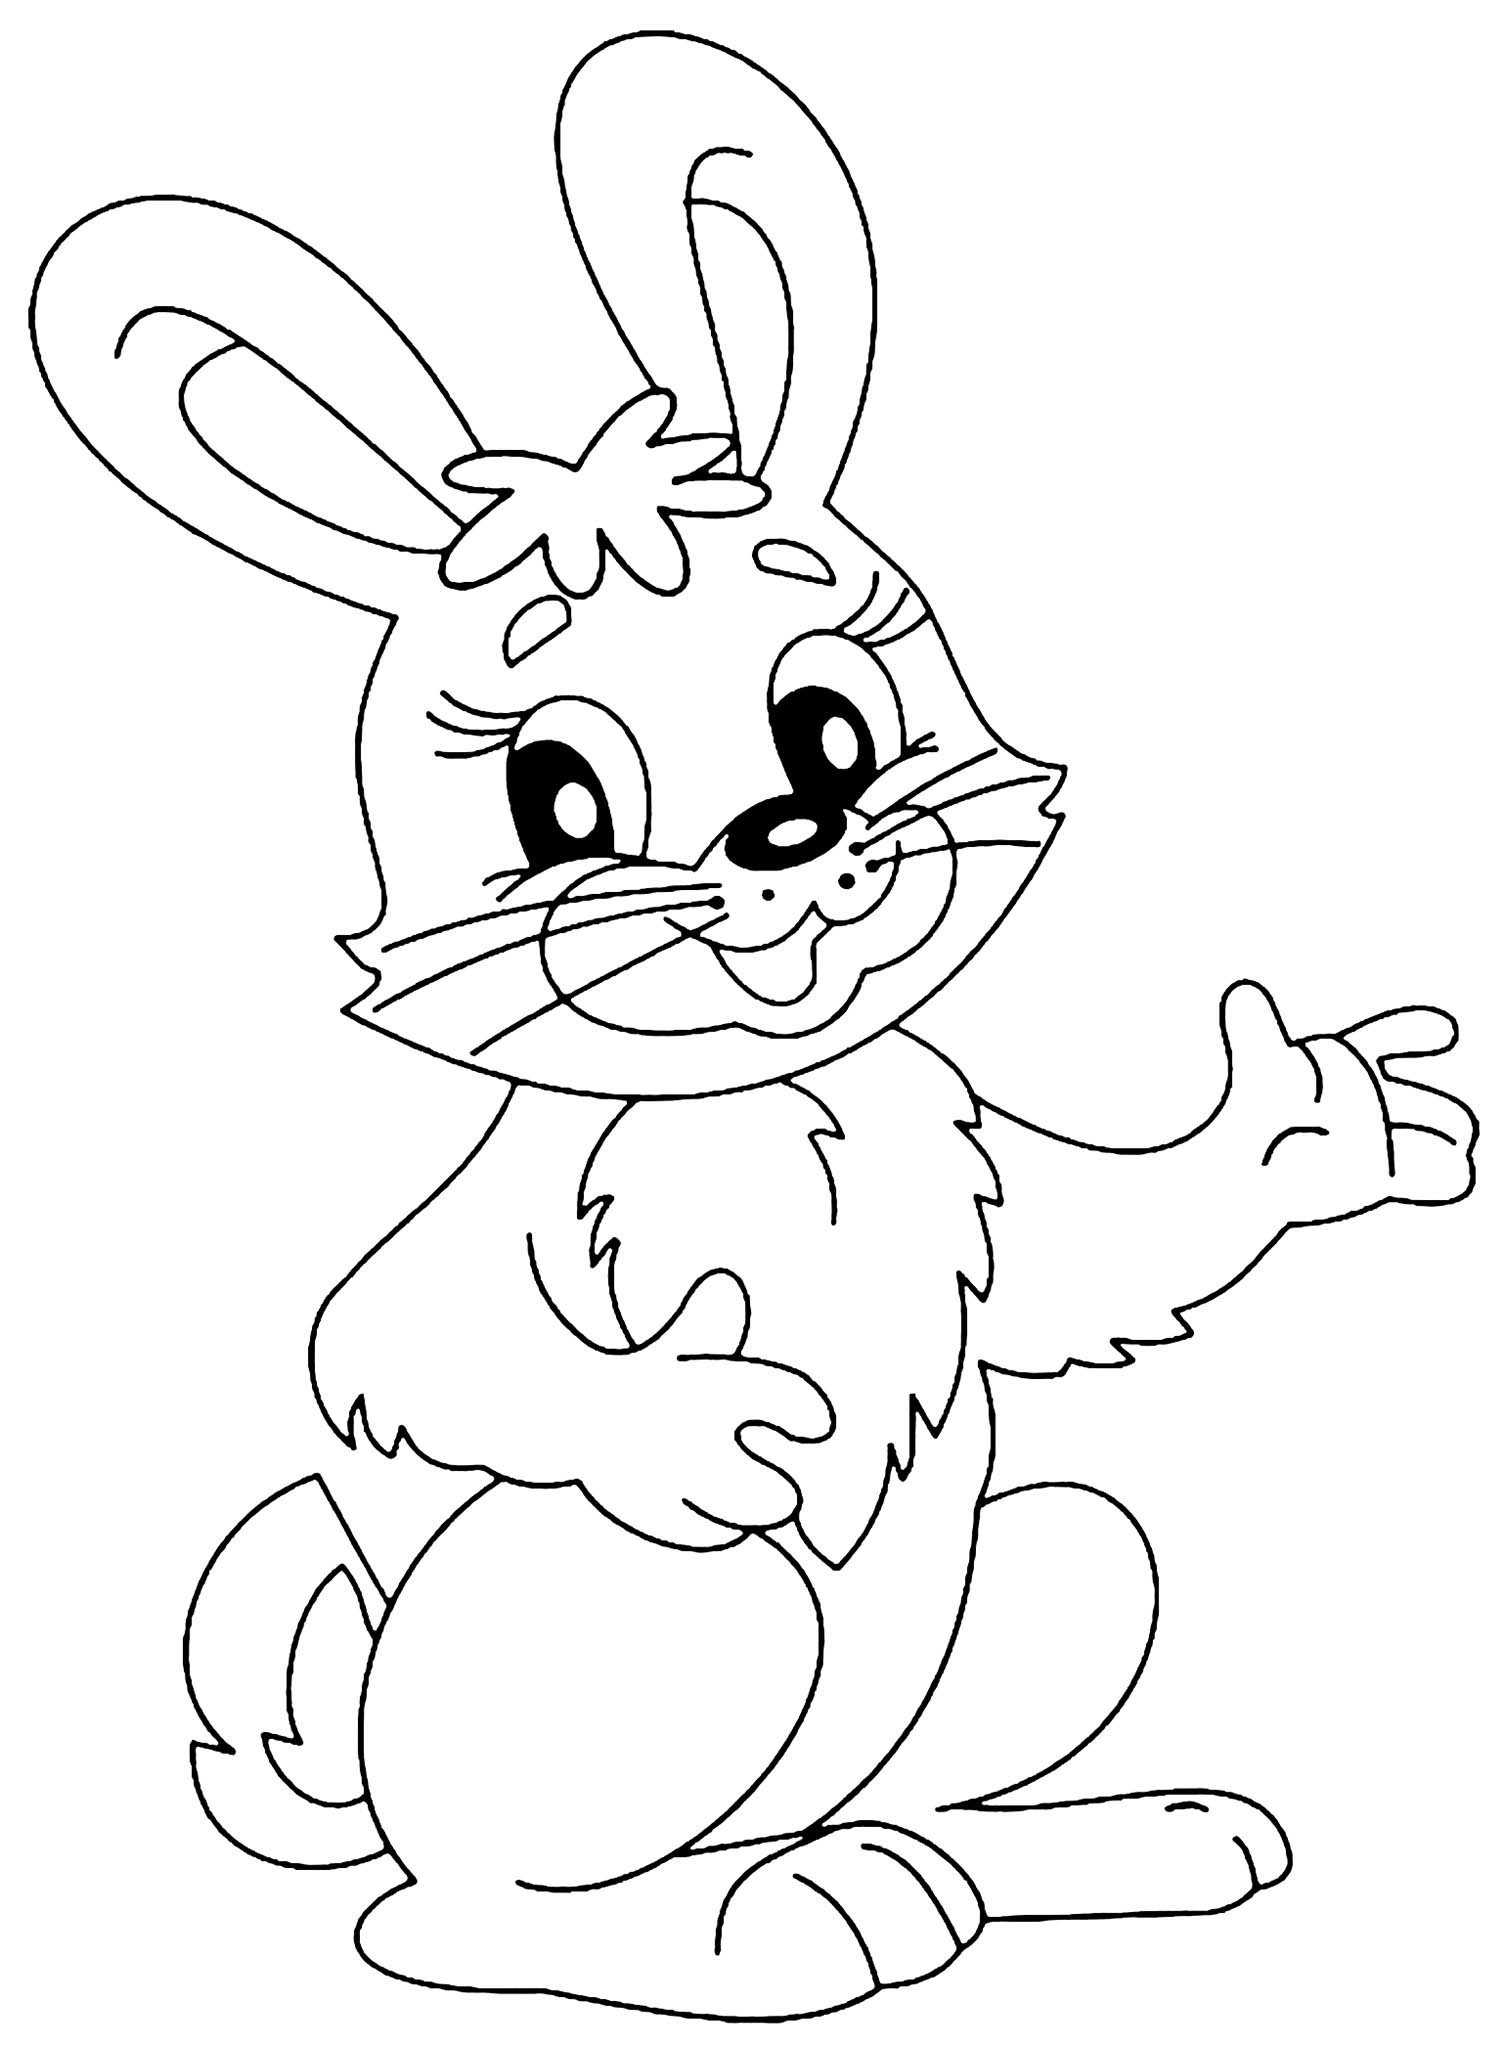 bunny drawing for kids